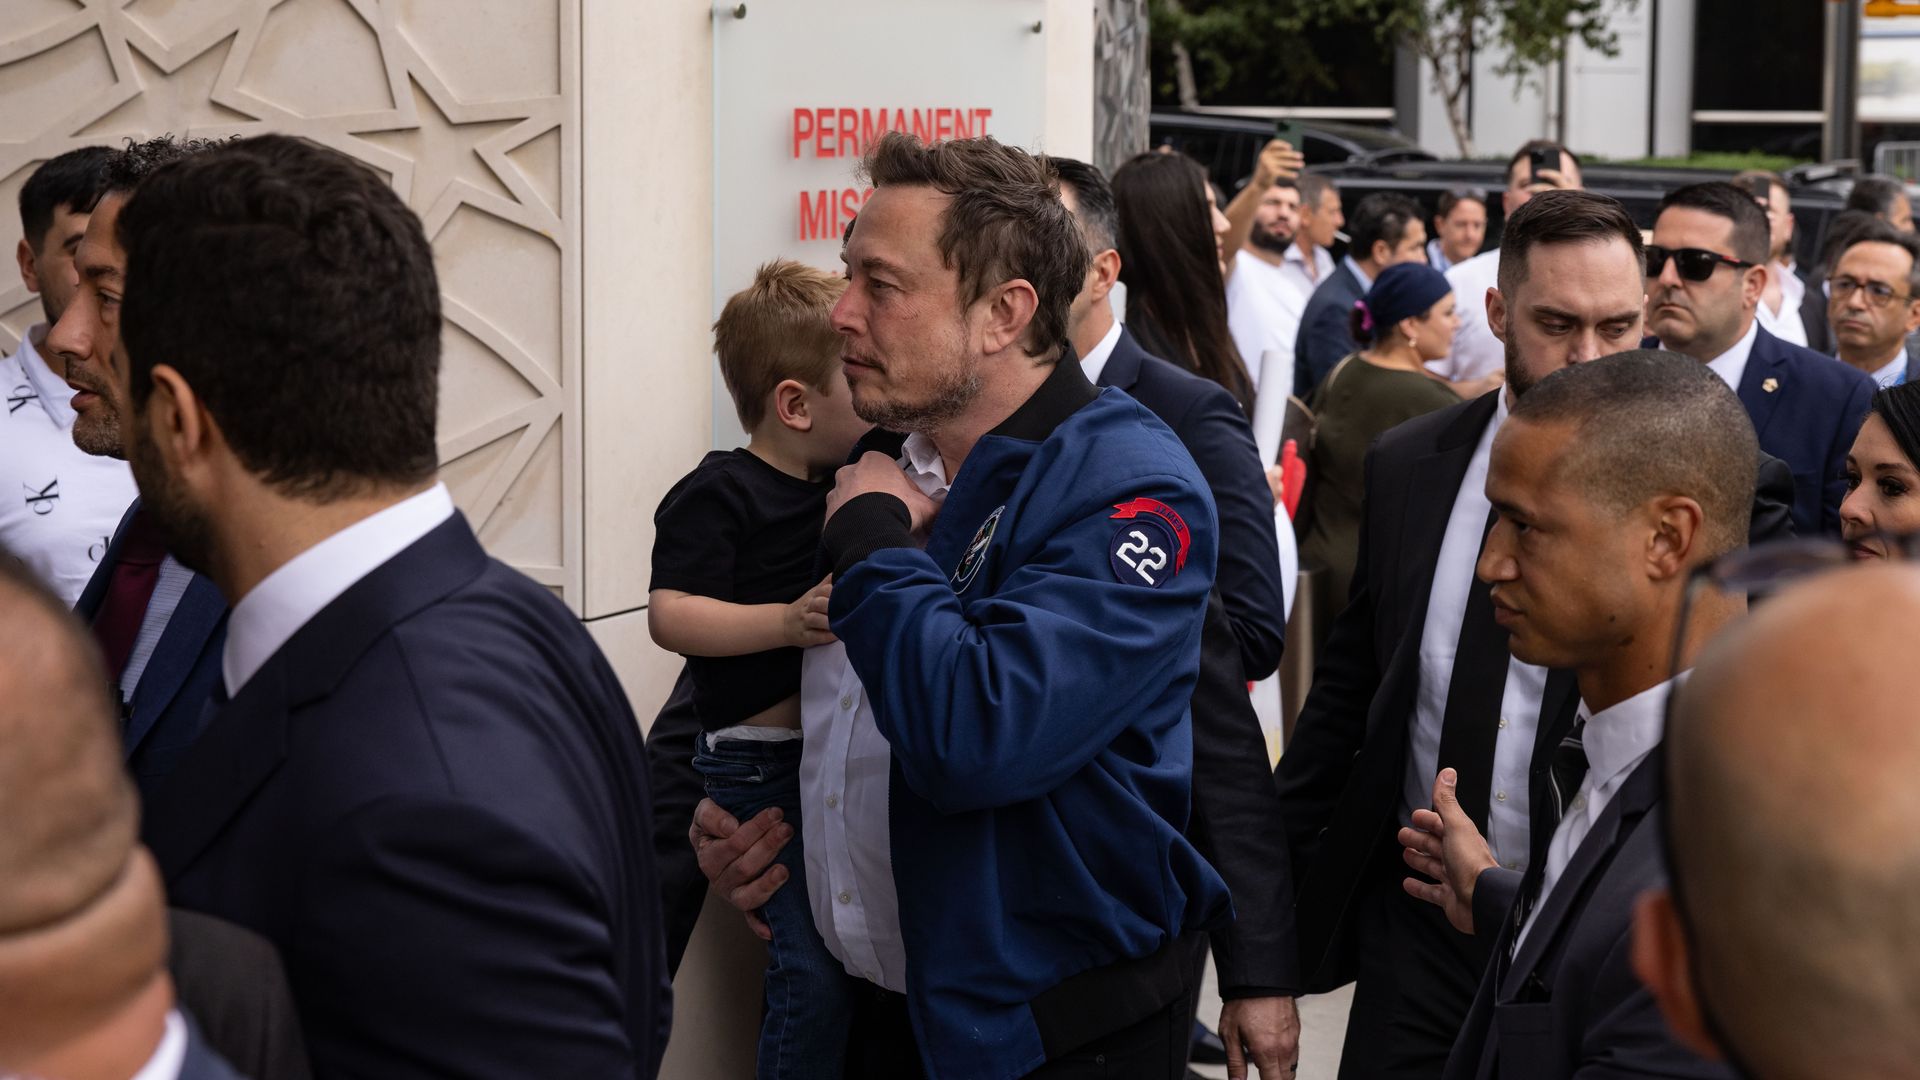 Elon Musk holding his son as they make their way into the Turkish House in New York City